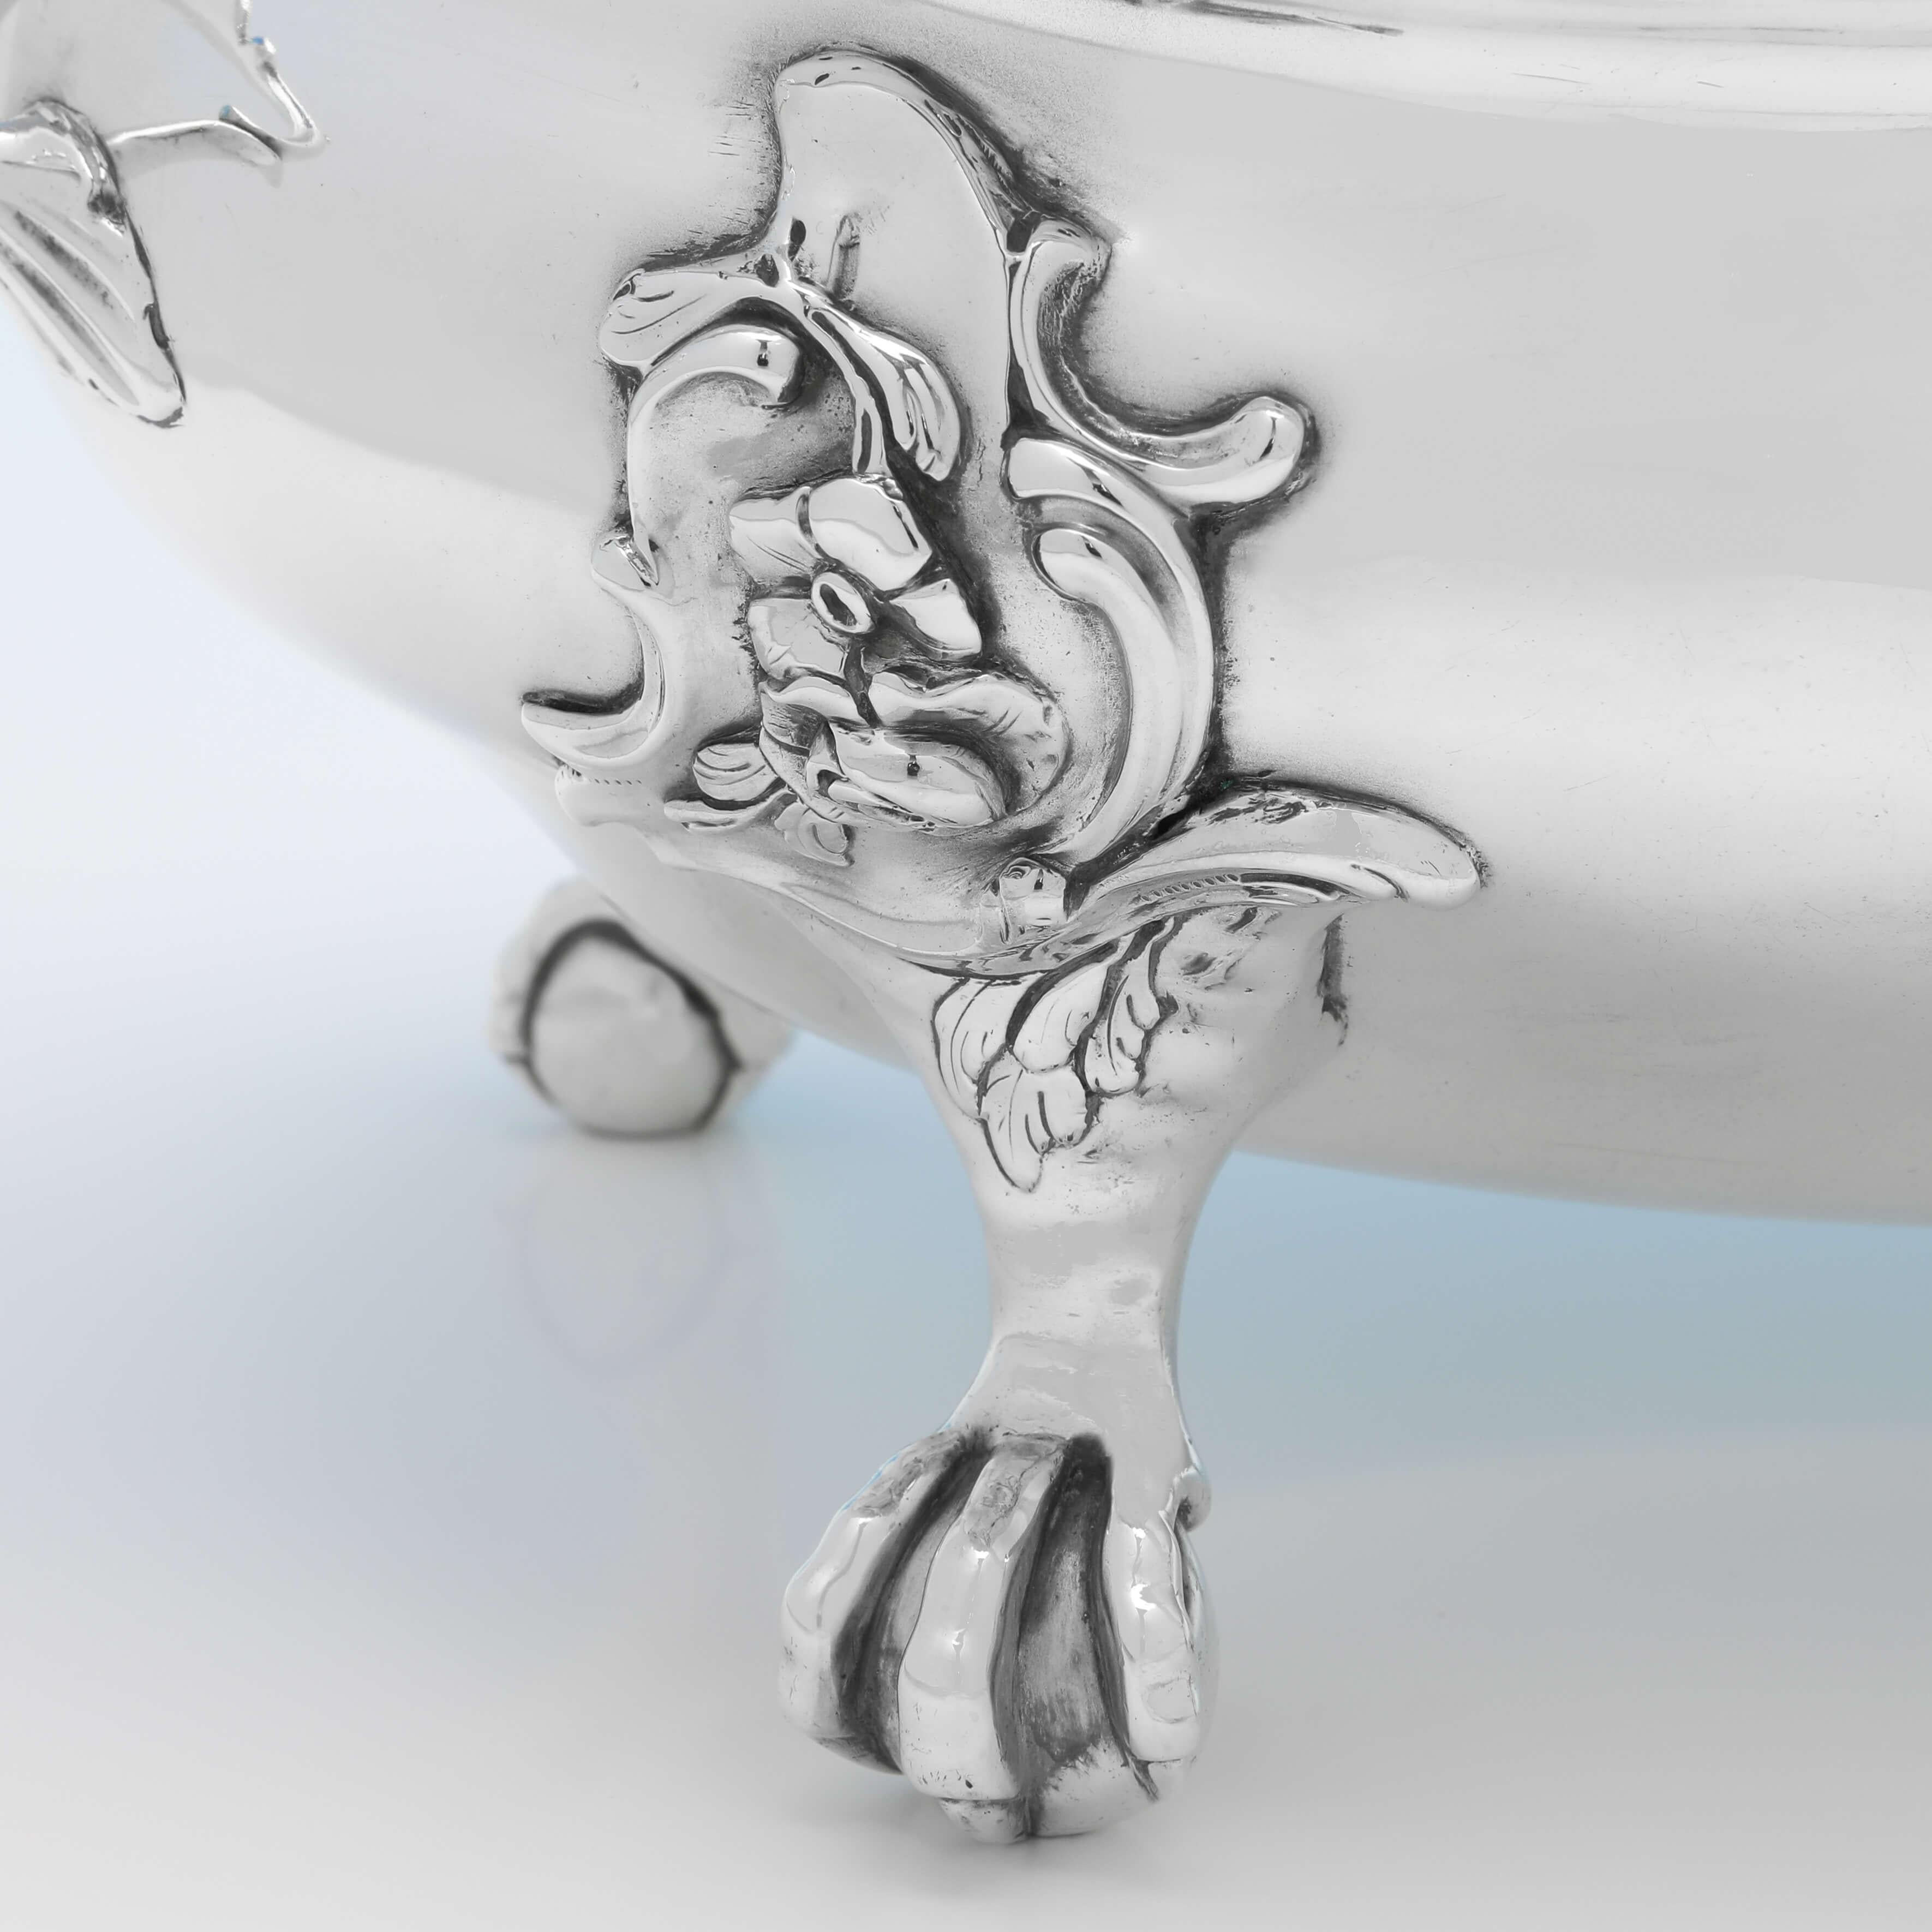 Rococo George III Sterling Silver Soup Tureen, Herne & Butty, London, 1766 For Sale 2